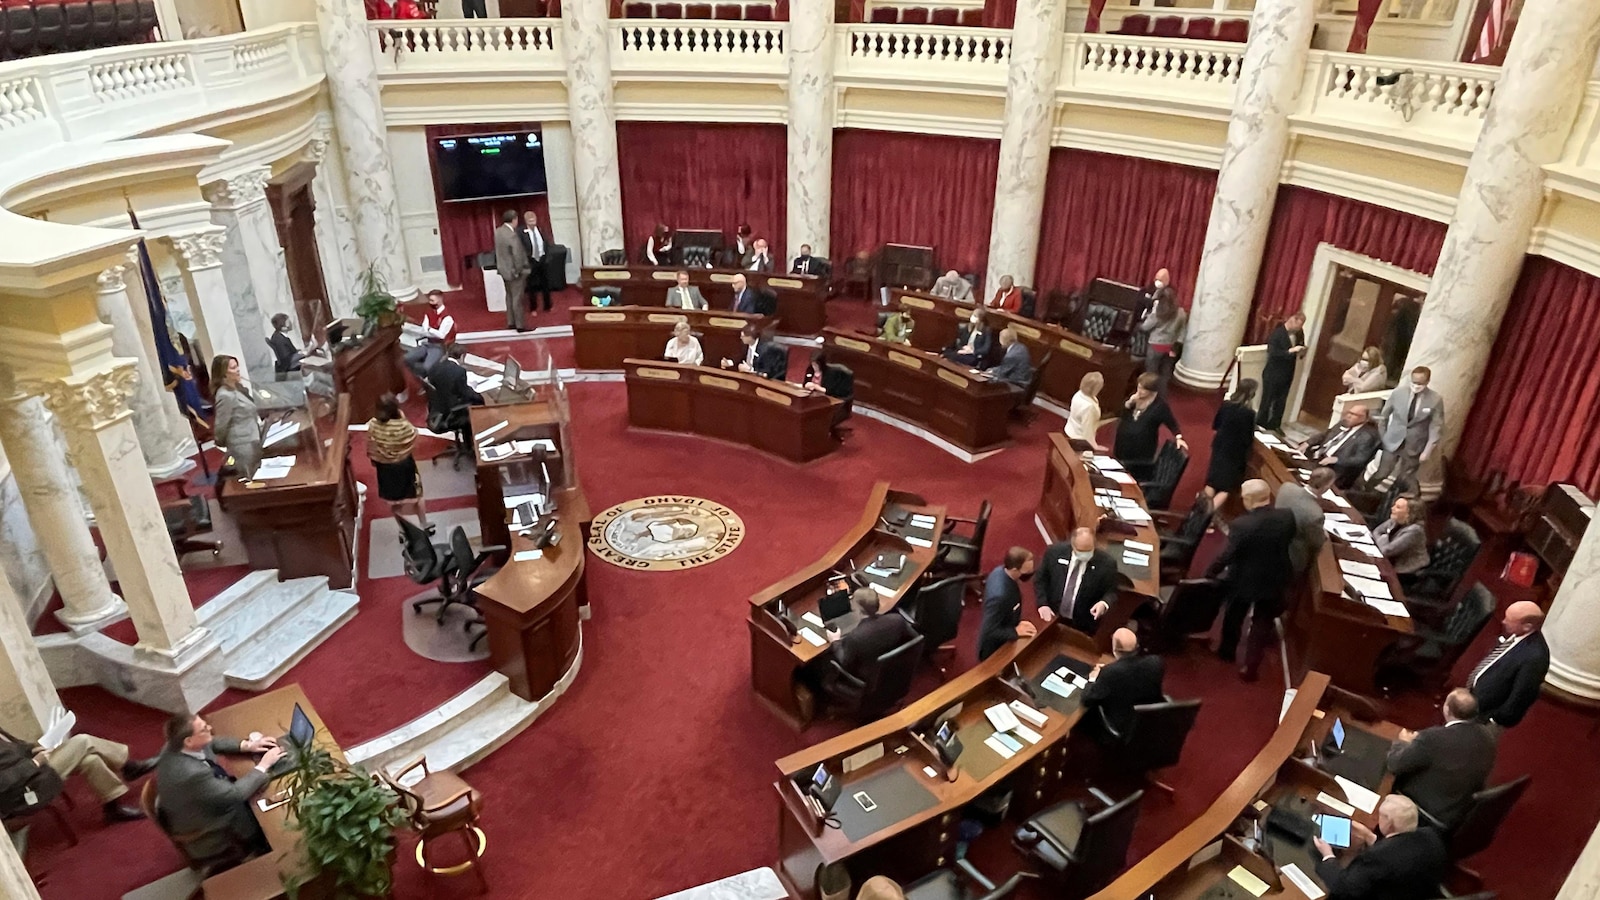 Idaho Contemplates Prohibition of Public Funding for Gender-Affirming Care Services and Facilities